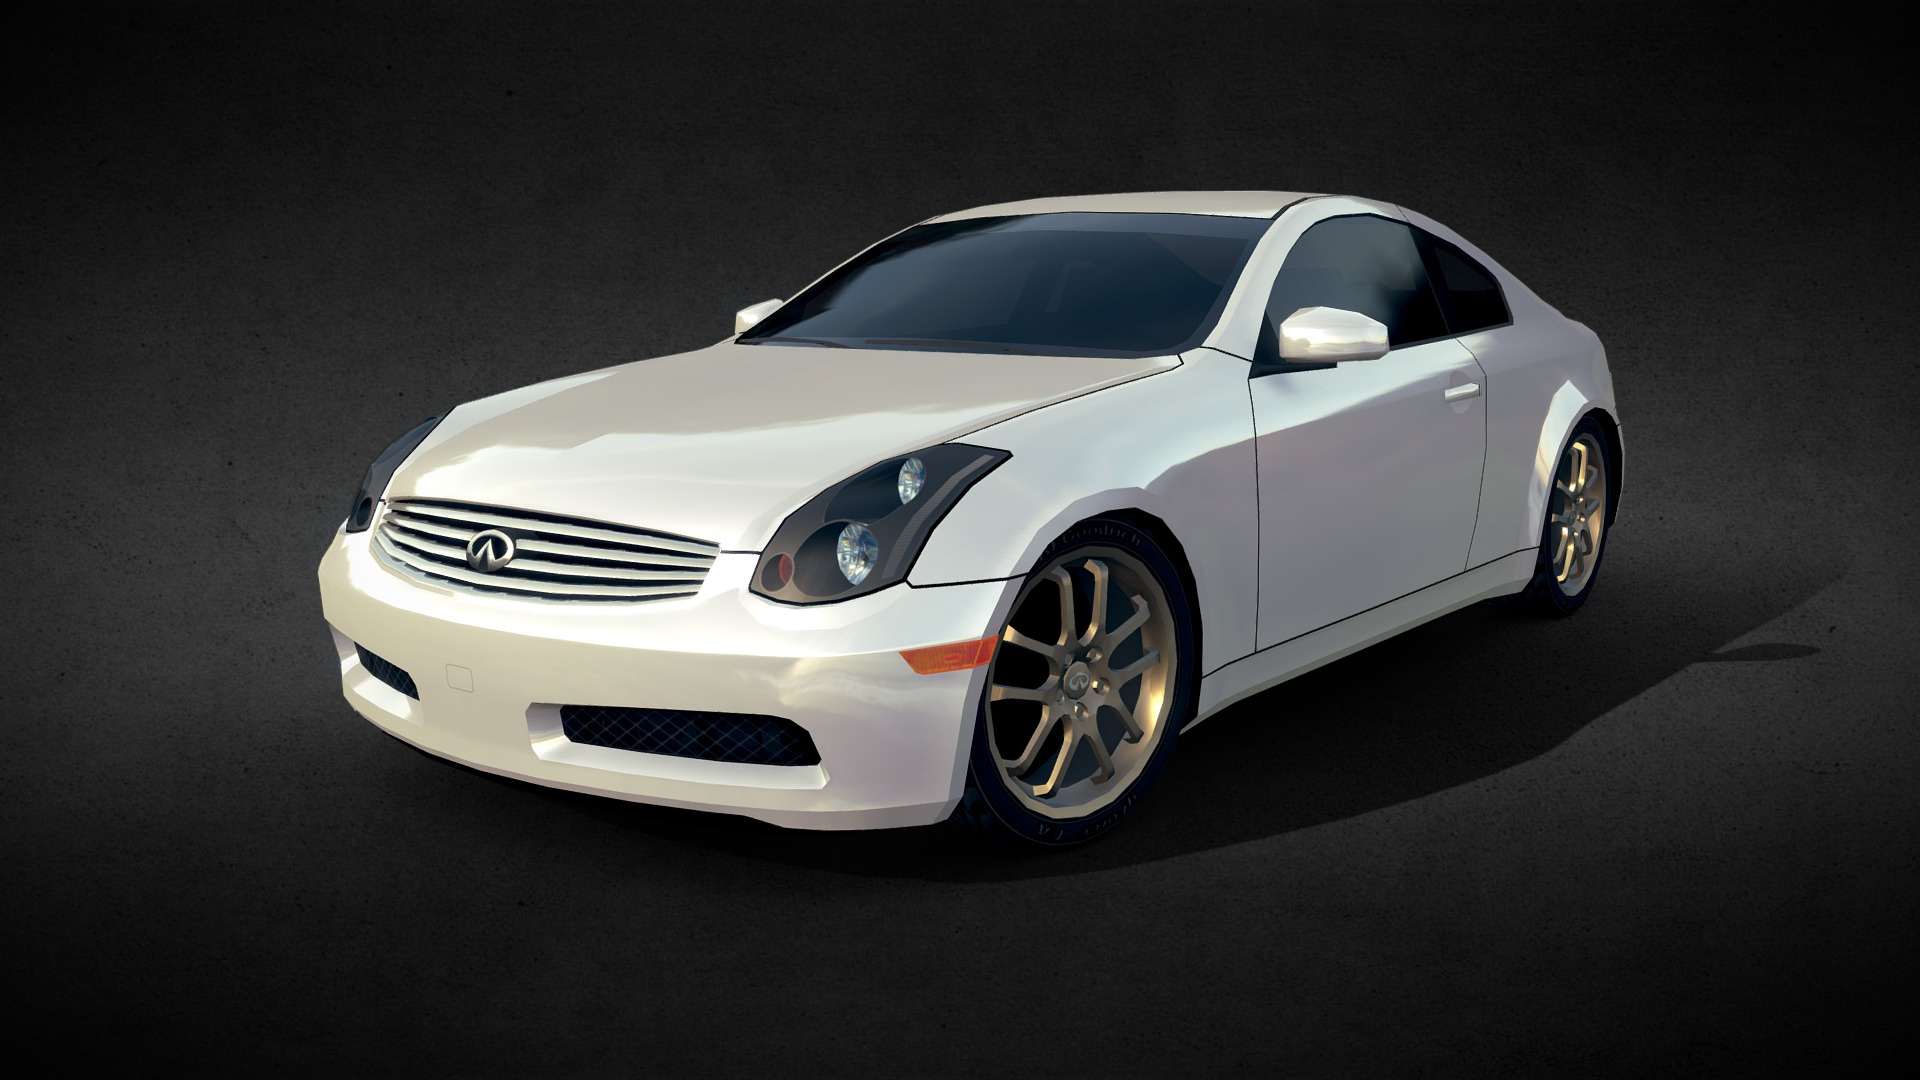 3D model 2005 Infiniti G35 - This is a 3D model of the 2005 Infiniti G35. The 3D model is about a white car on a road.